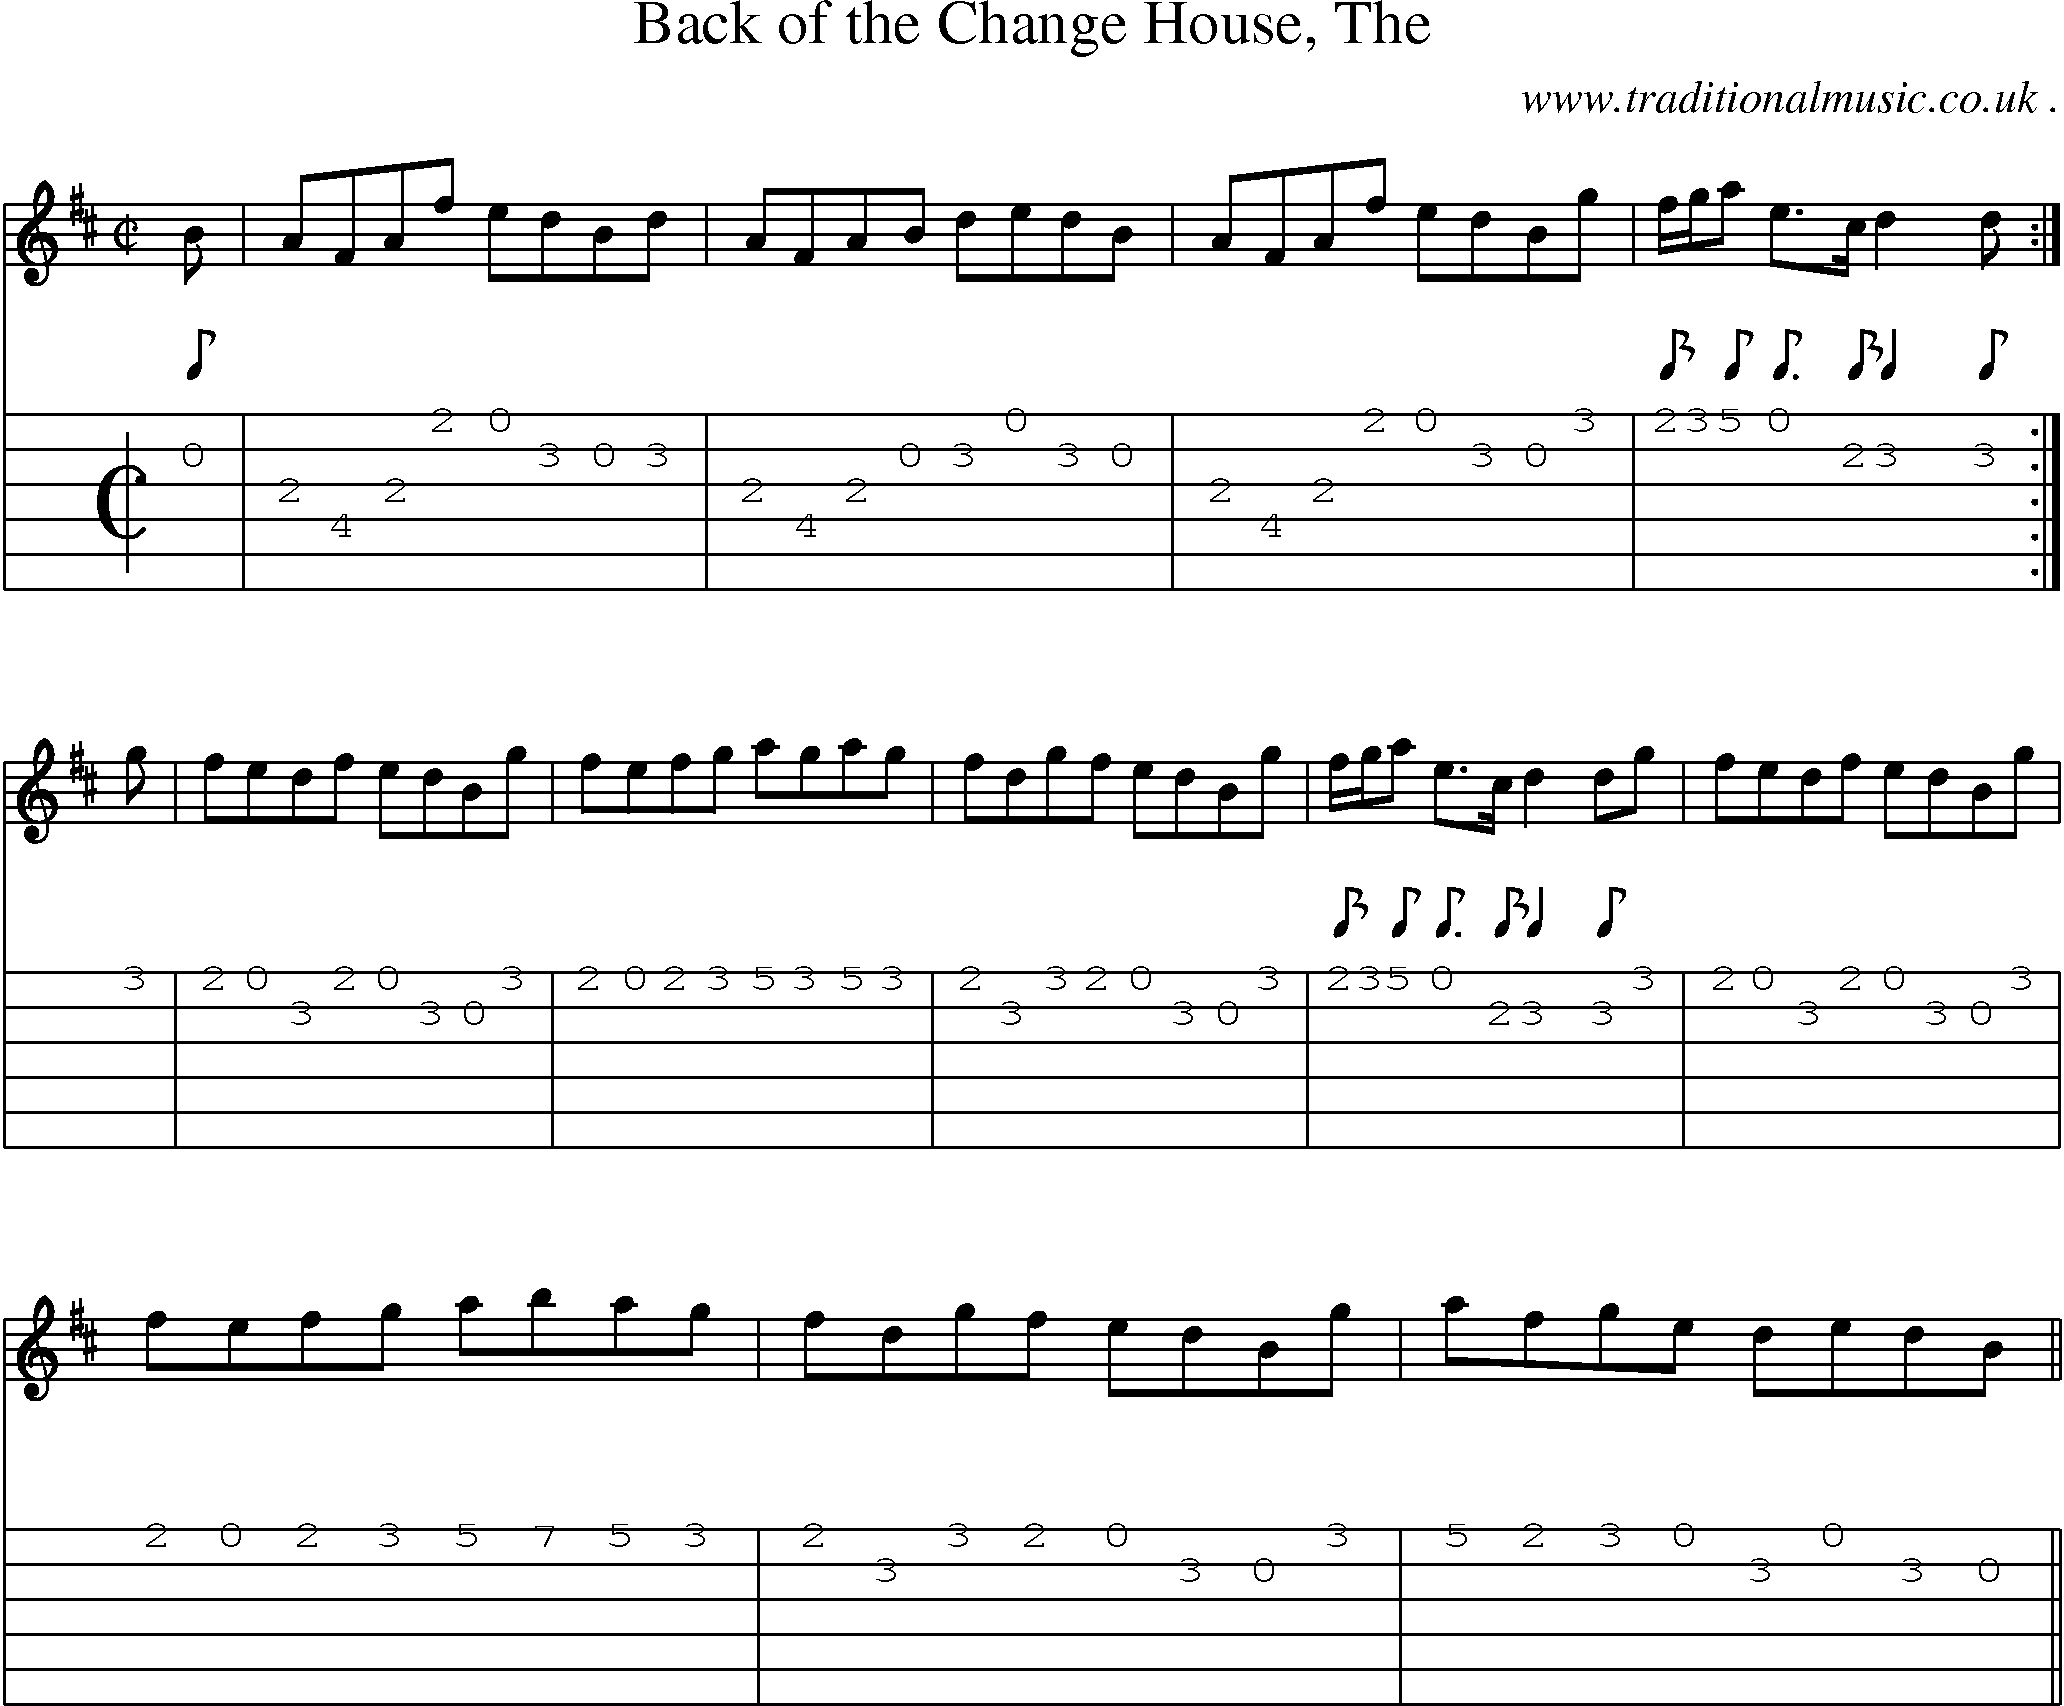 Sheet-music  score, Chords and Guitar Tabs for Back Of The Change House The